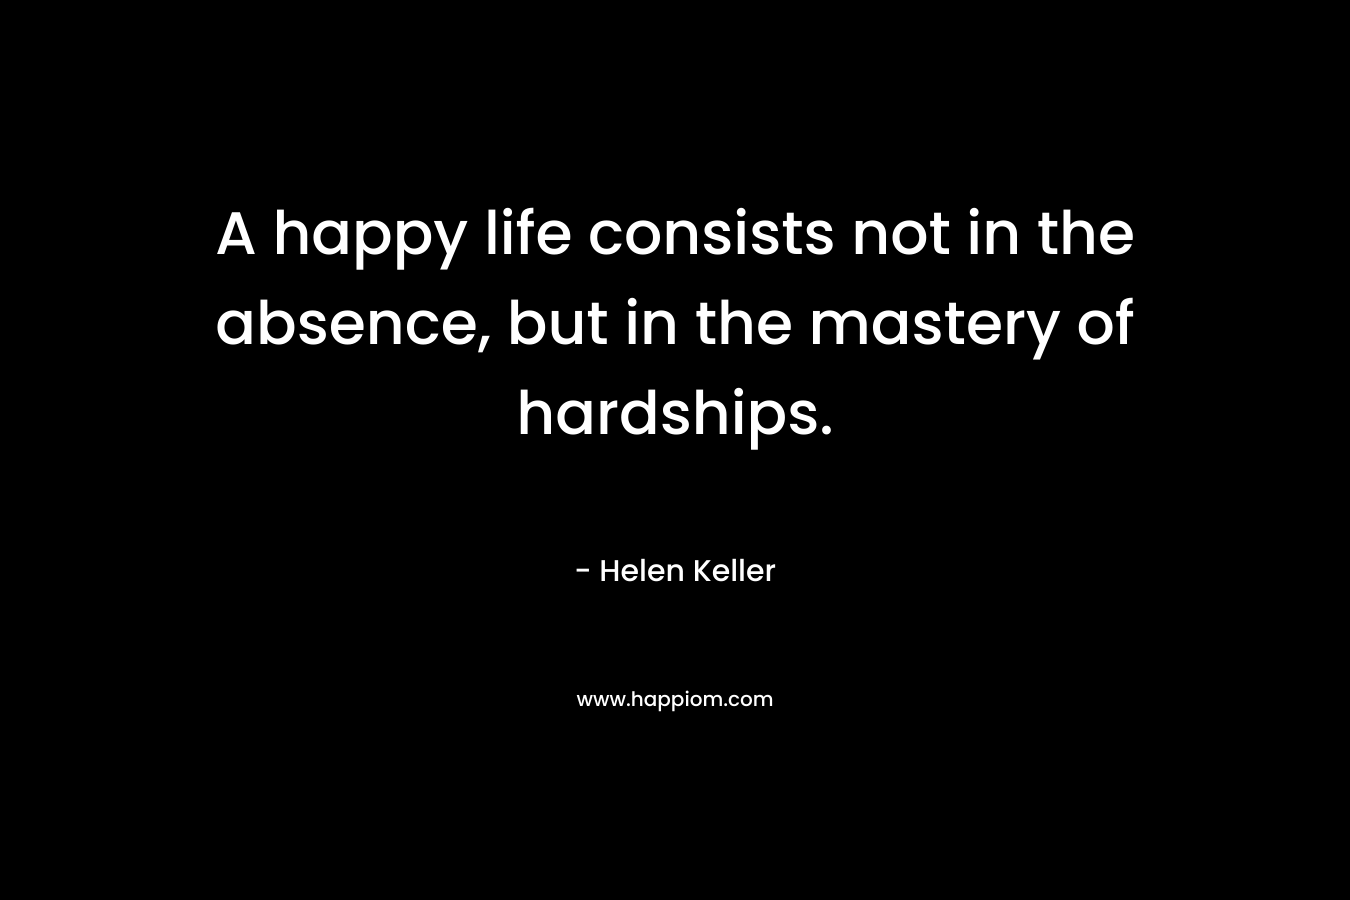 A happy life consists not in the absence, but in the mastery of hardships. – Helen Keller